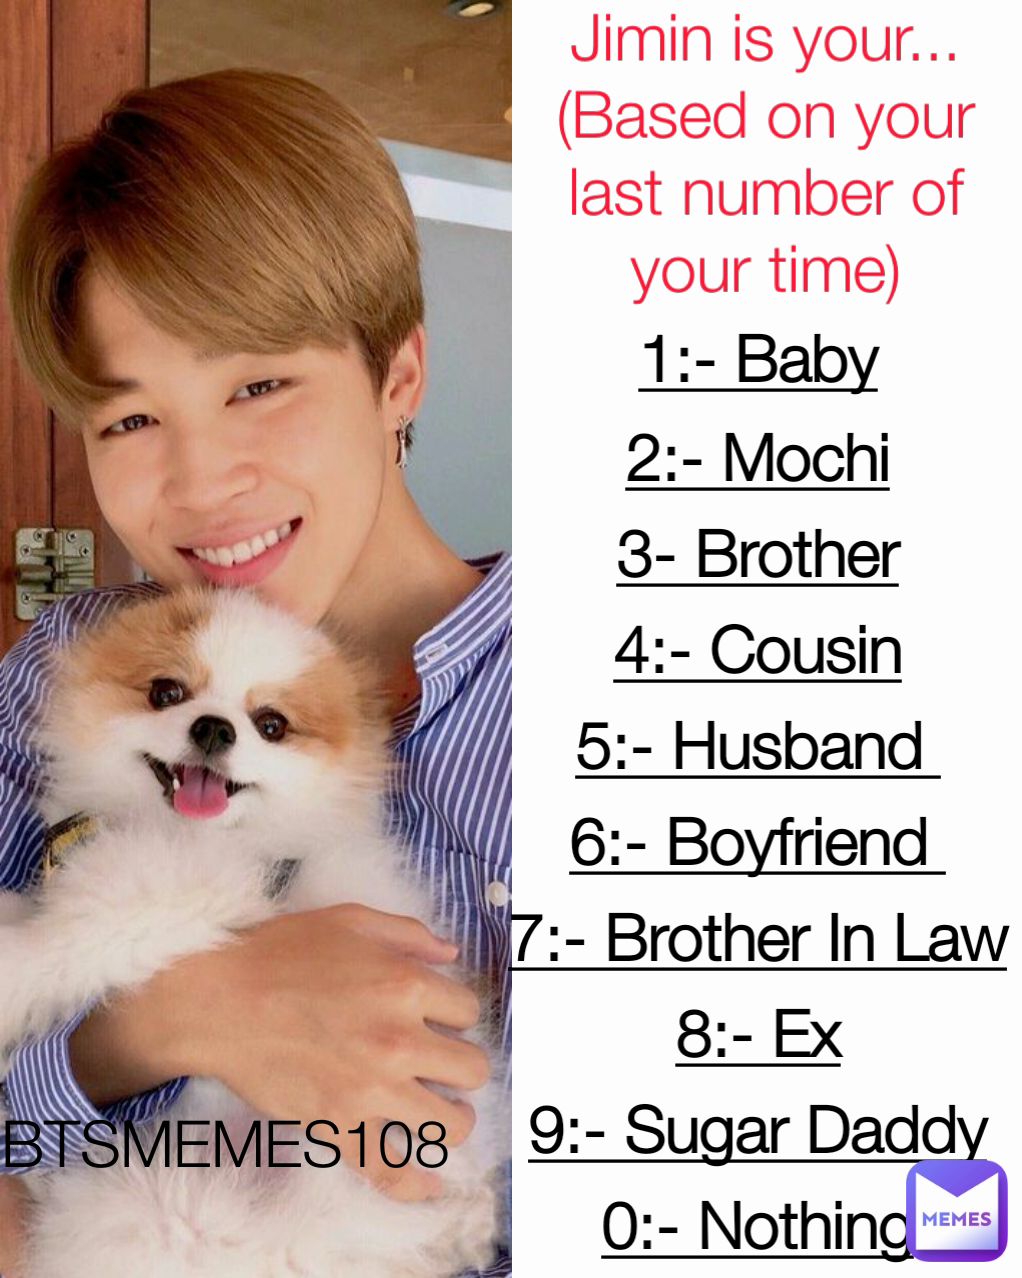 BTSMEMES108  1:- Baby
2:- Mochi
3- Brother
4:- Cousin
5:- Husband 
6:- Boyfriend 
7:- Brother In Law
8:- Ex
9:- Sugar Daddy
0:- Nothing Jimin is your...
(Based on your last number of your time)